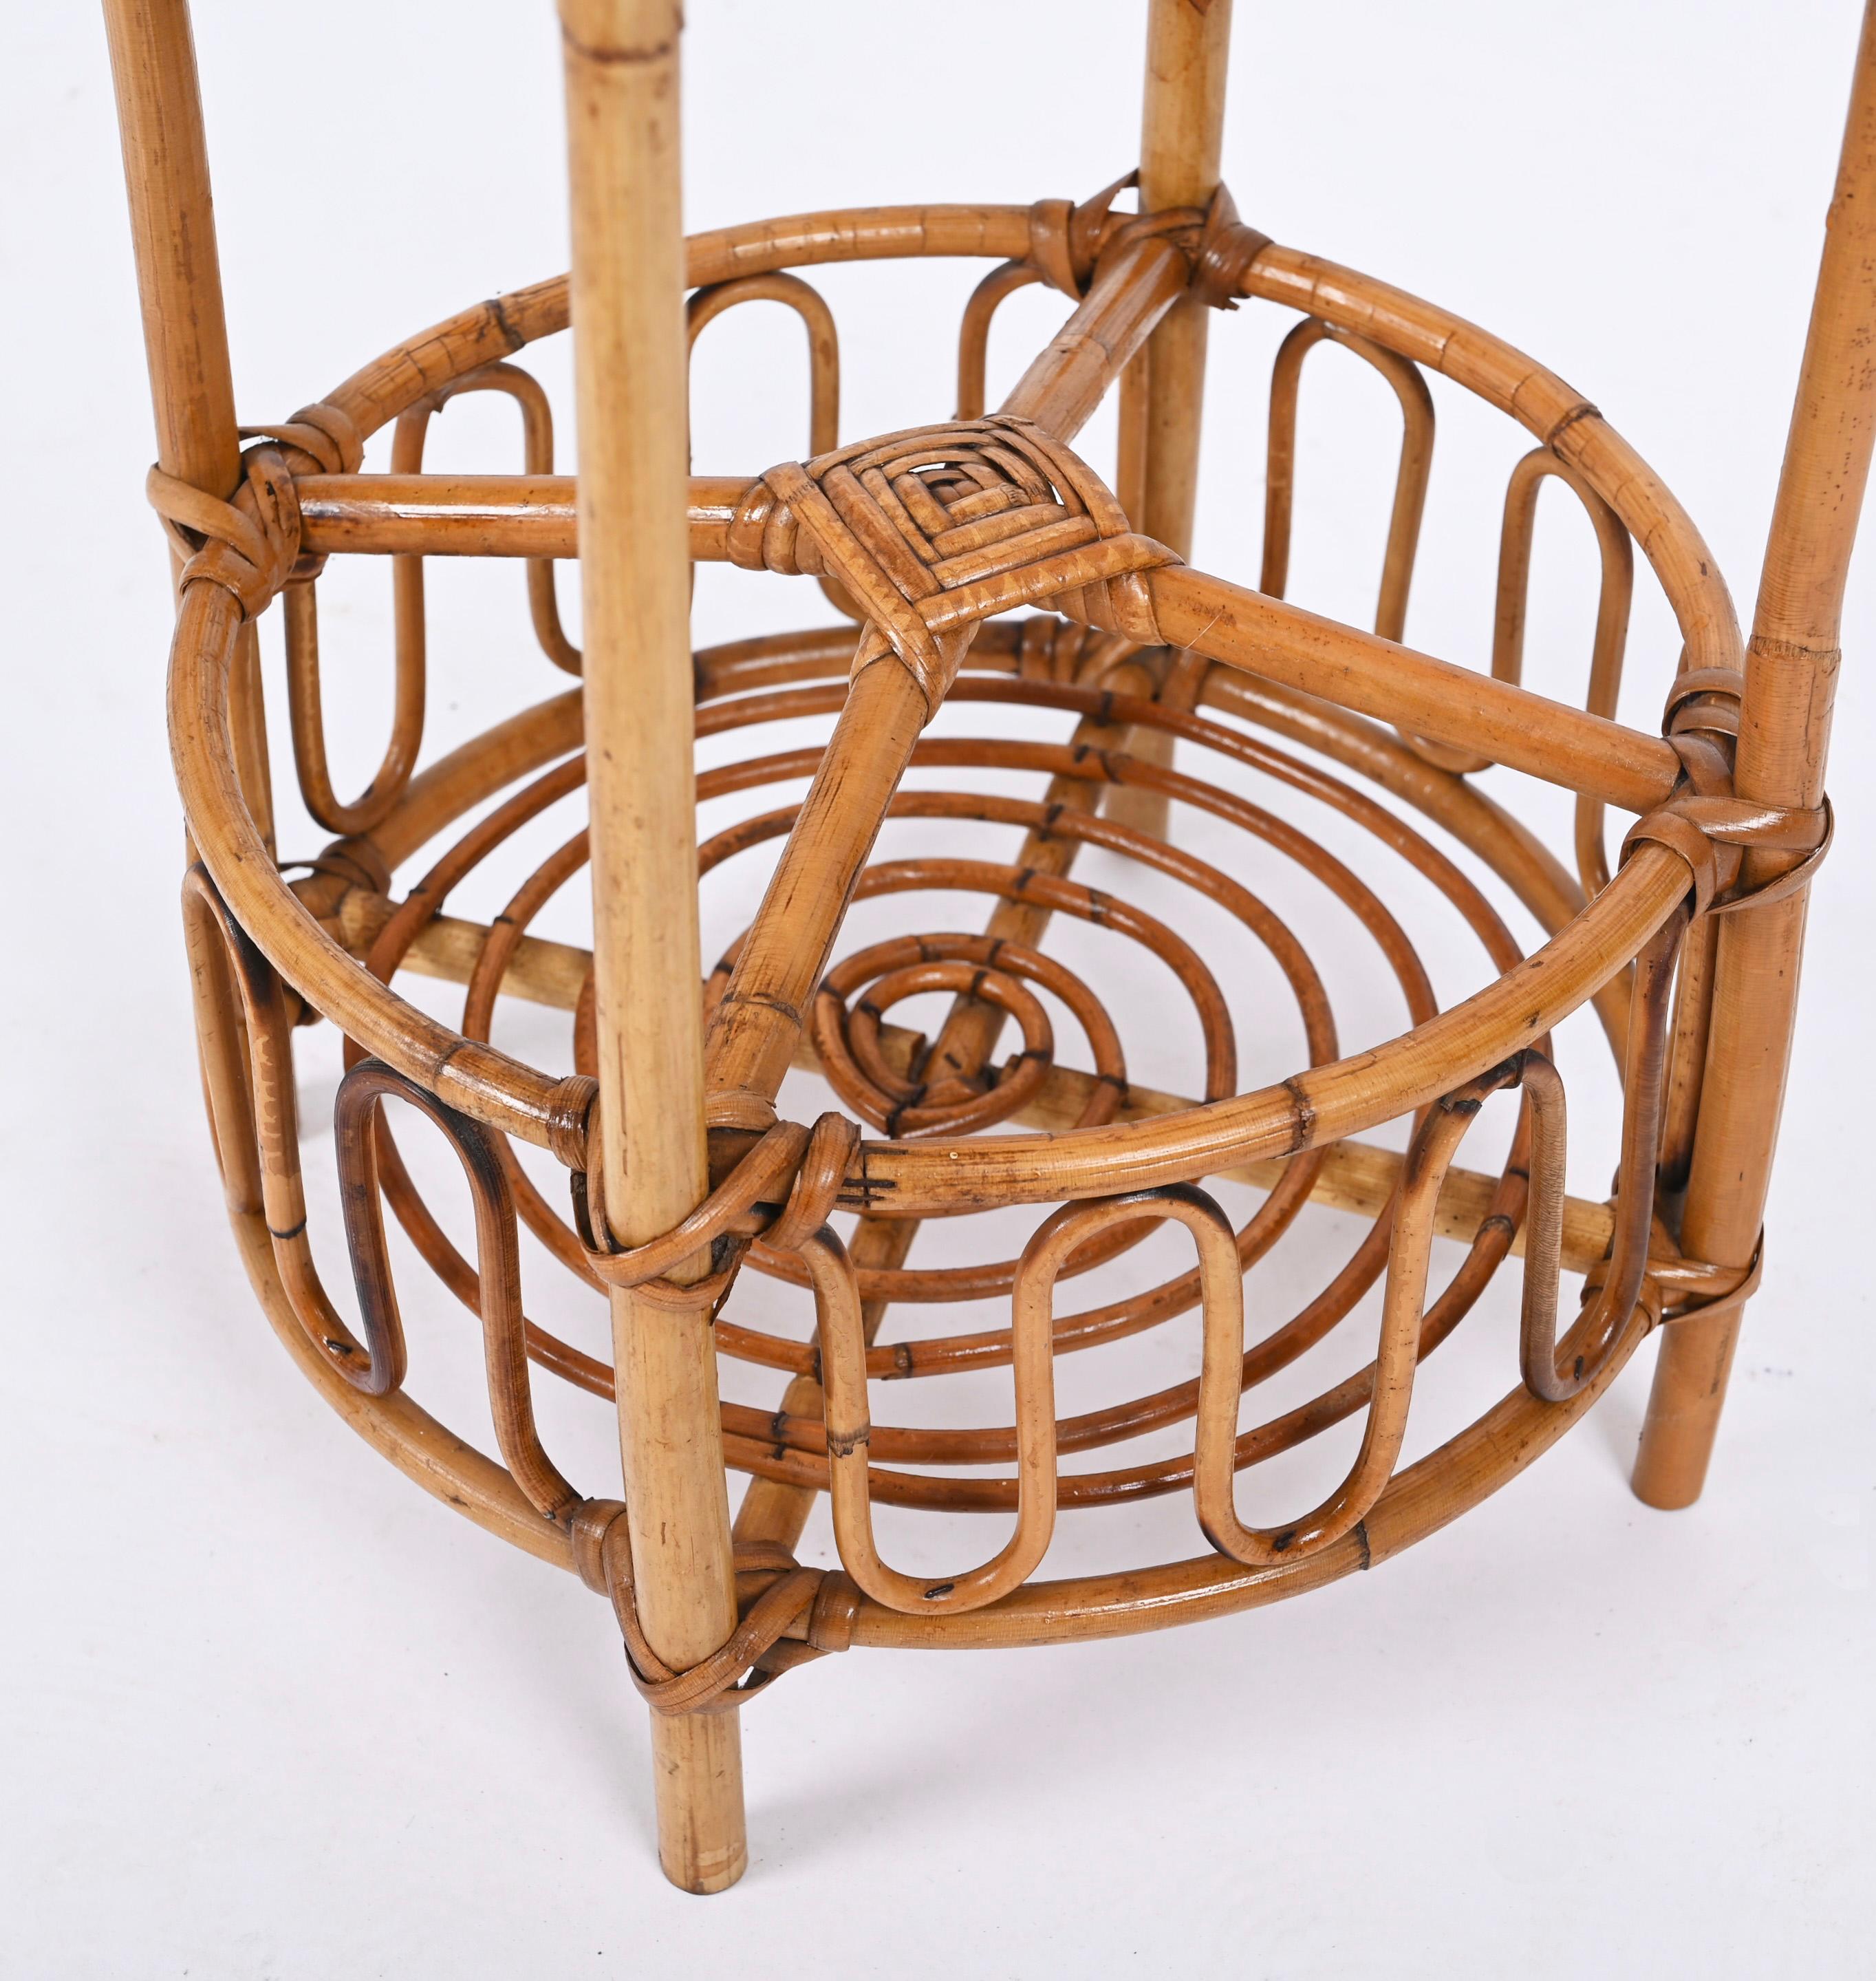 French Riviera Round Service Table with Bamboo and Rattan Bottle Holder, 1960s For Sale 1